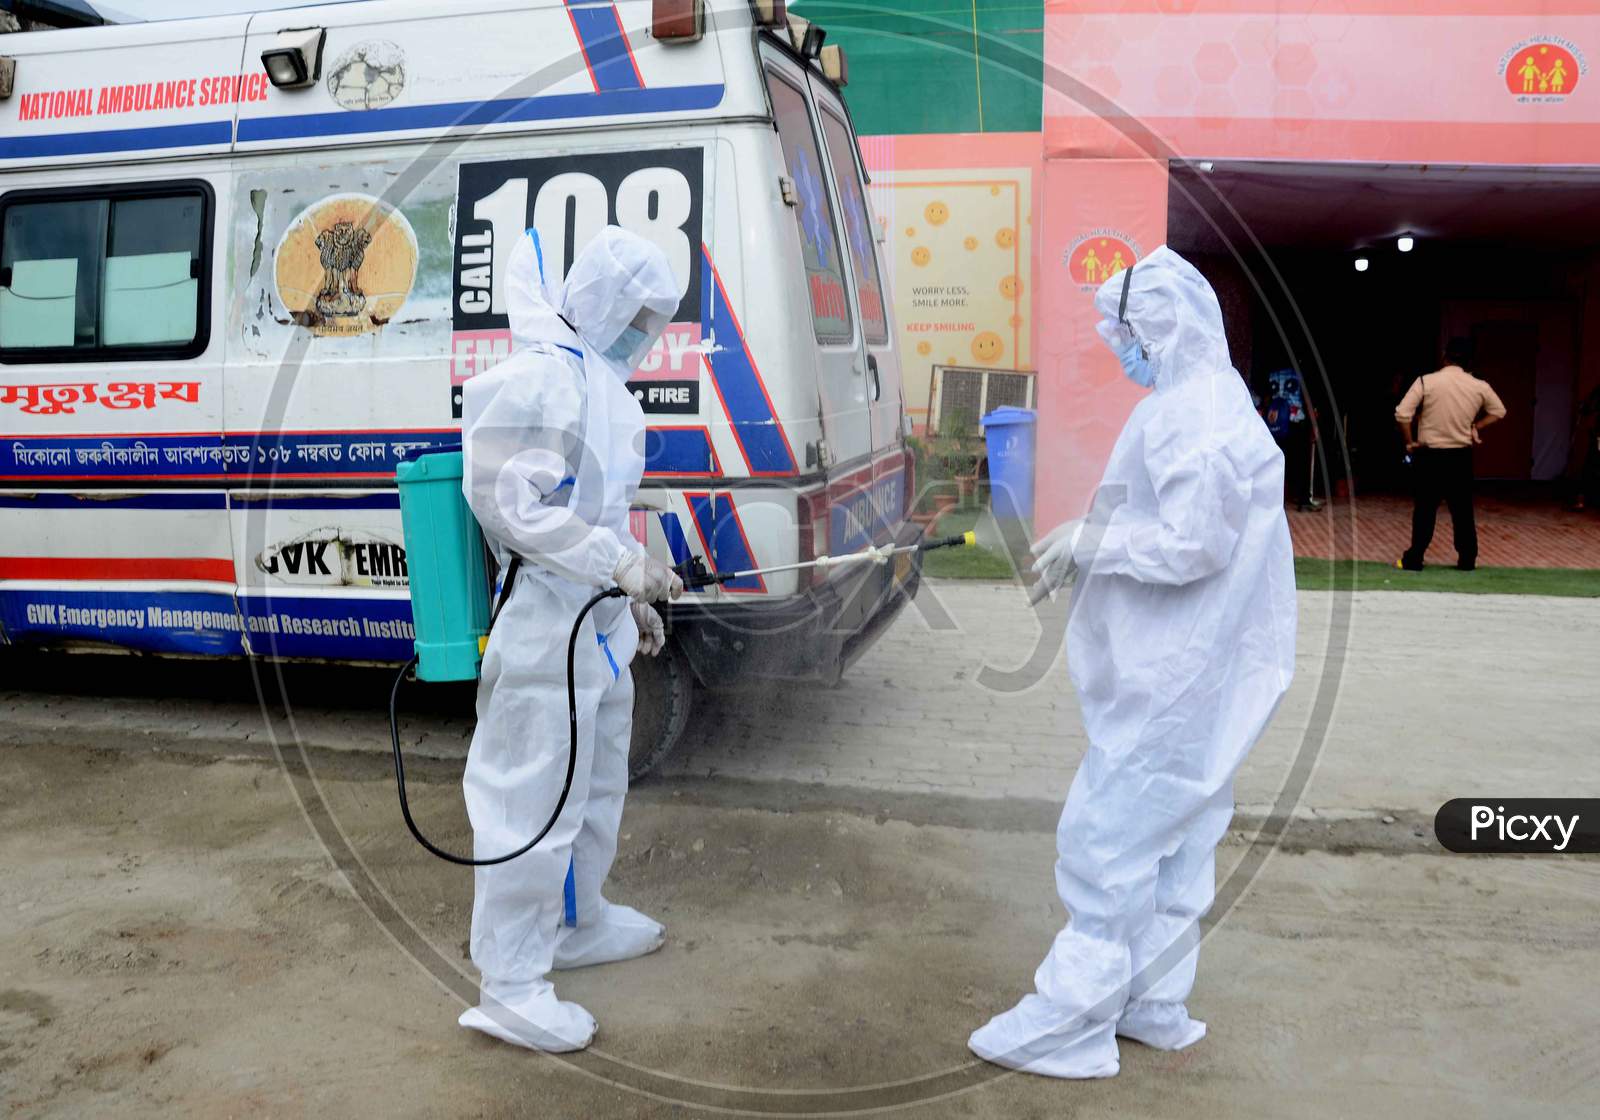 A worker disinfectant spray to an Ambulance driver